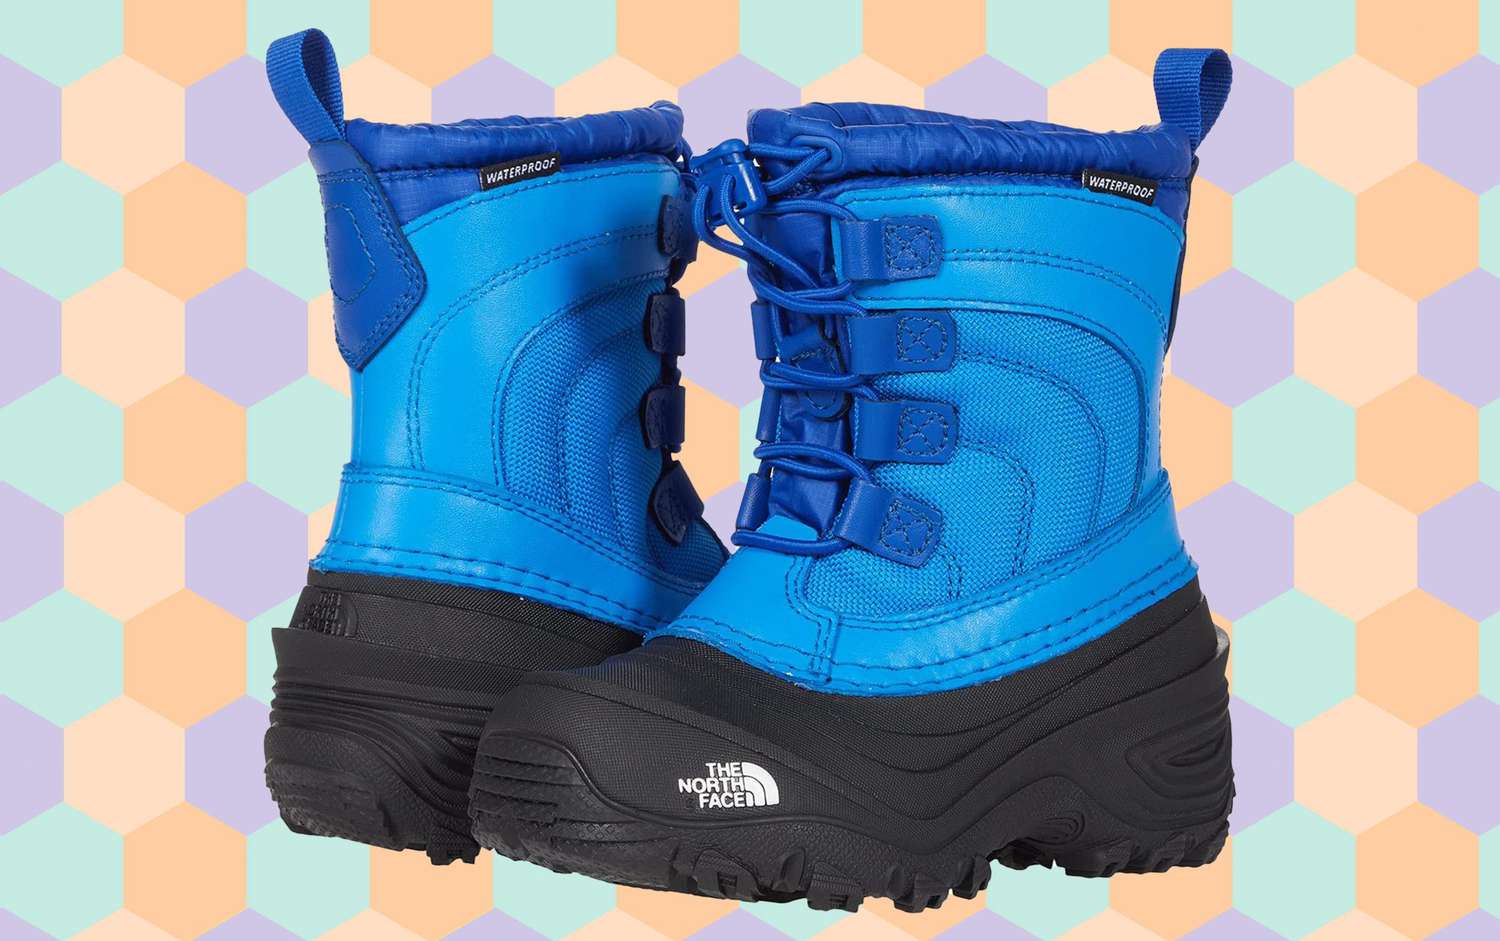 Toddler/Little Kid/Big Kid Kids Snow Boots Water Resistant Warm Inside Boys Girls Hiking Boots Cold Weather Non Slip Winter Boot